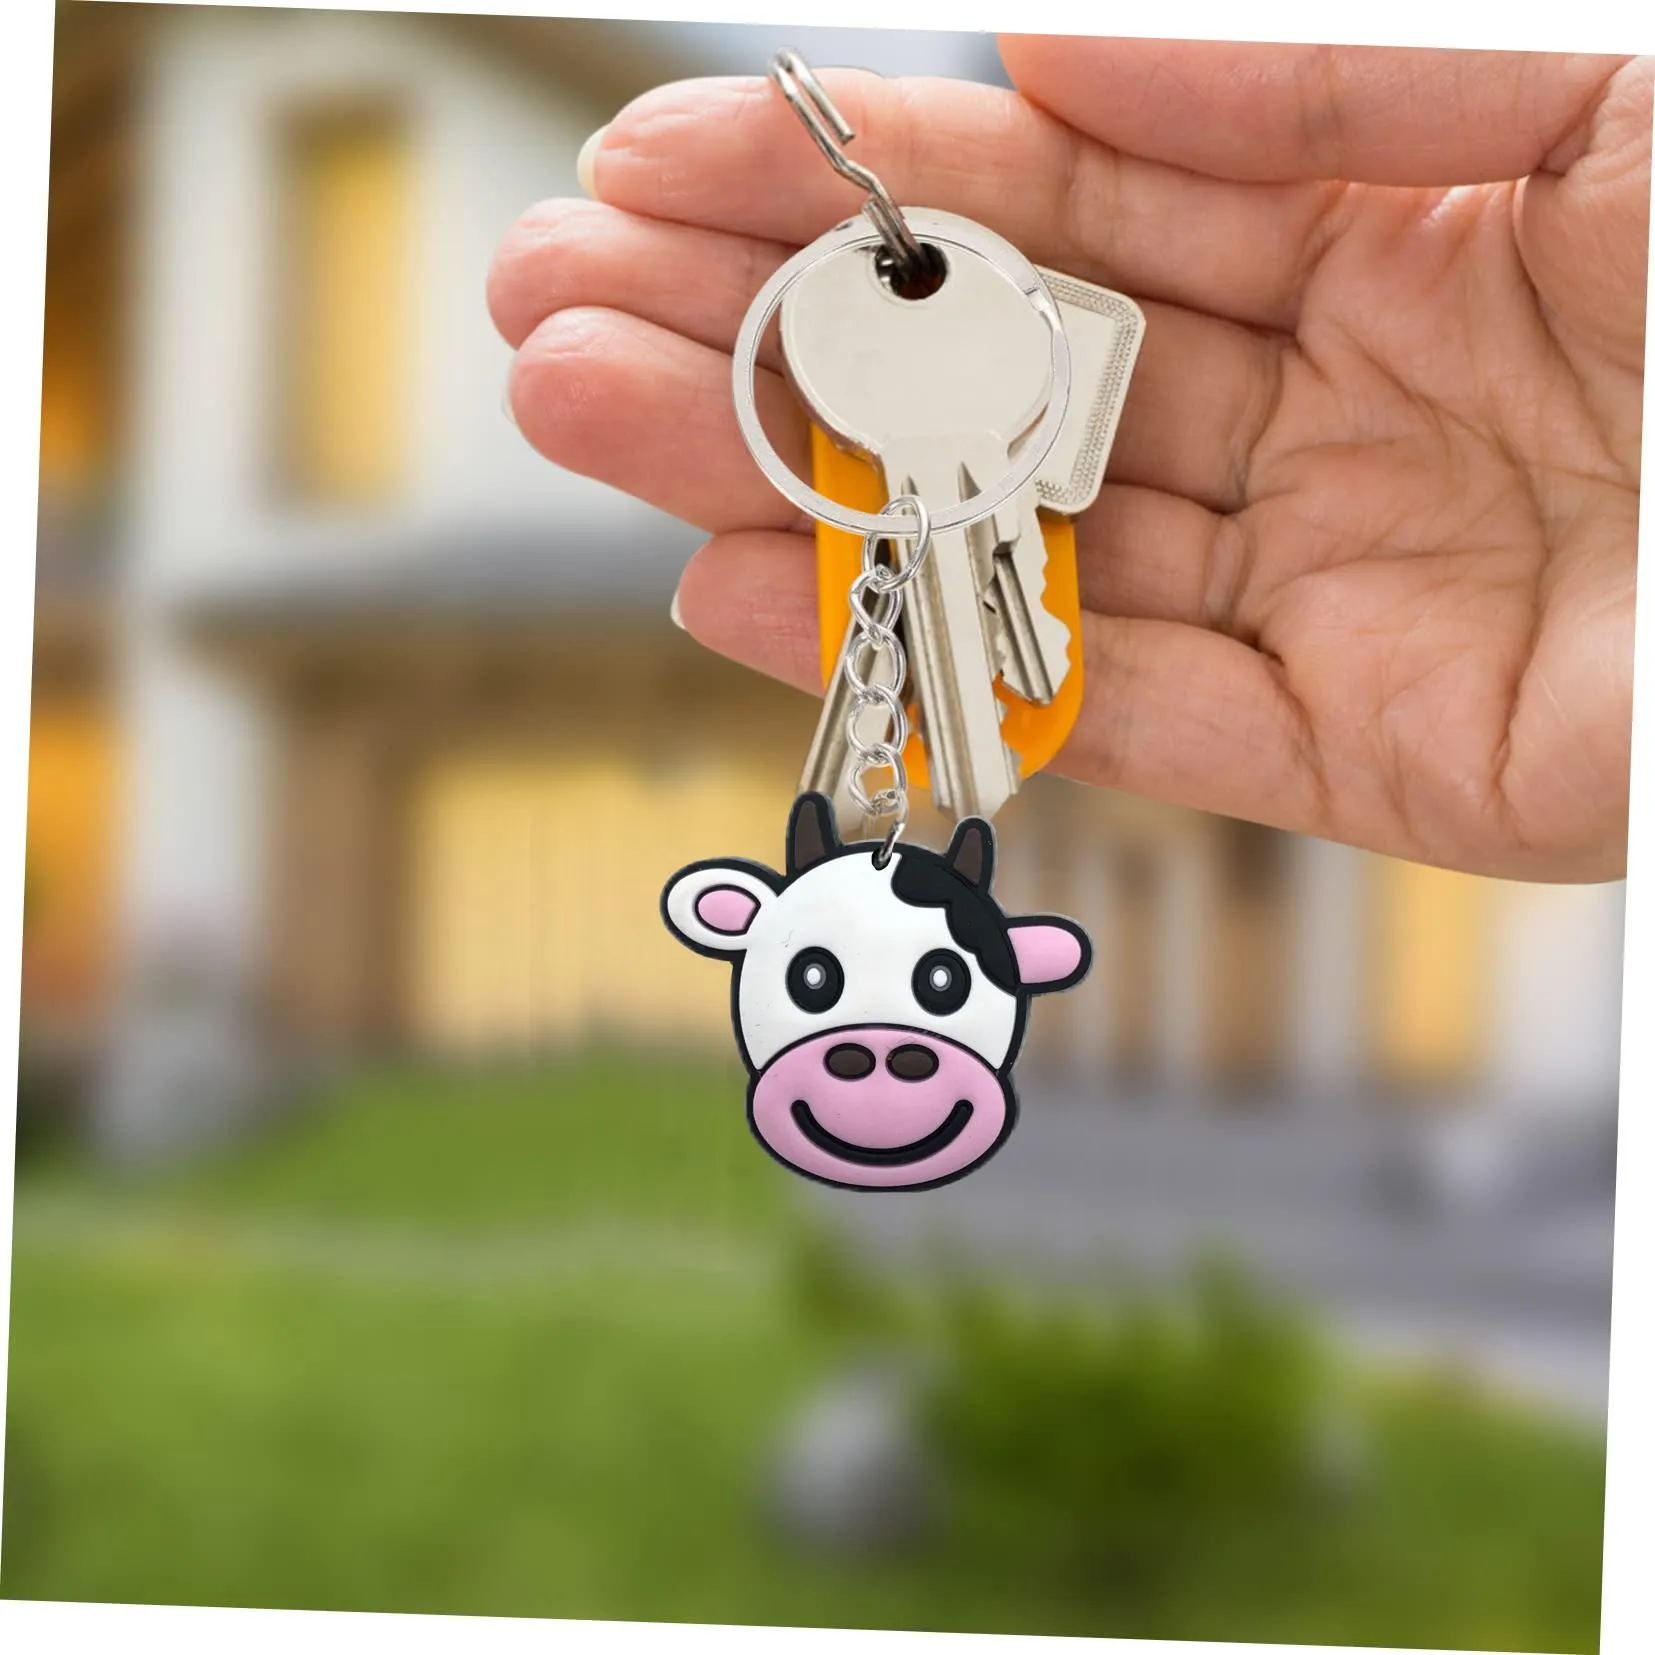 cow 32 keychain keychains for women key chain kid boy girl party favors gift pendants accessories kids birthday keyring suitable schoolbag backpack car charms anime cool backpacks ring girls